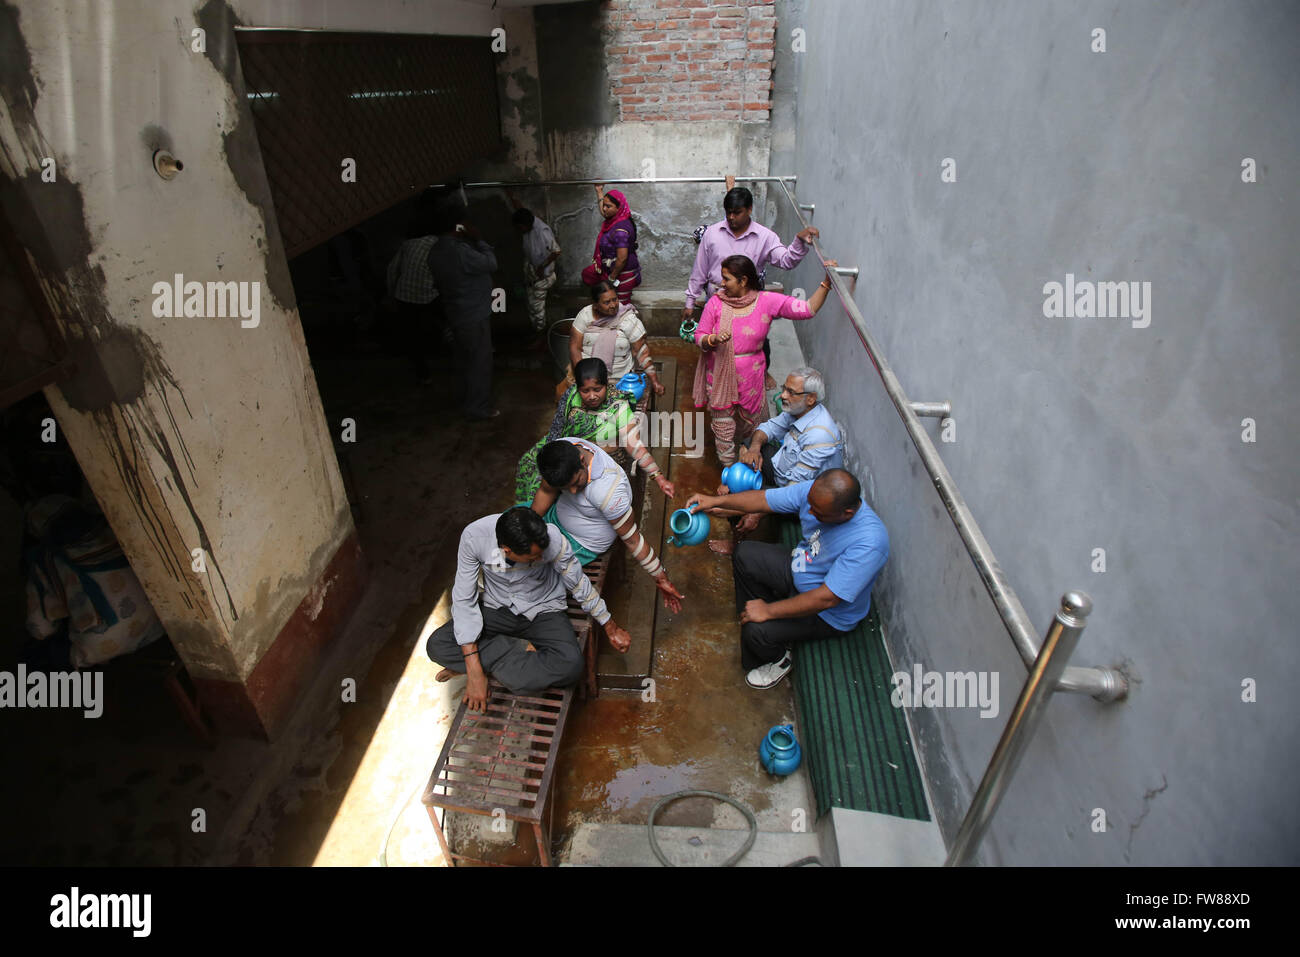 New Delhi, India. 1st April, 2016. A helper washes the hands of patients after they were made cuts by Mohammad Iqbal, a practitioner locally know as Hakeem, in Wazirabad Gaon village in North Delhi, India, April 1, 2016. An Open air clinic 'Rahat Open Surgery' boasts of curing its patients by using old practice of bloodletting. Credit:  Xinhua/Alamy Live News Stock Photo